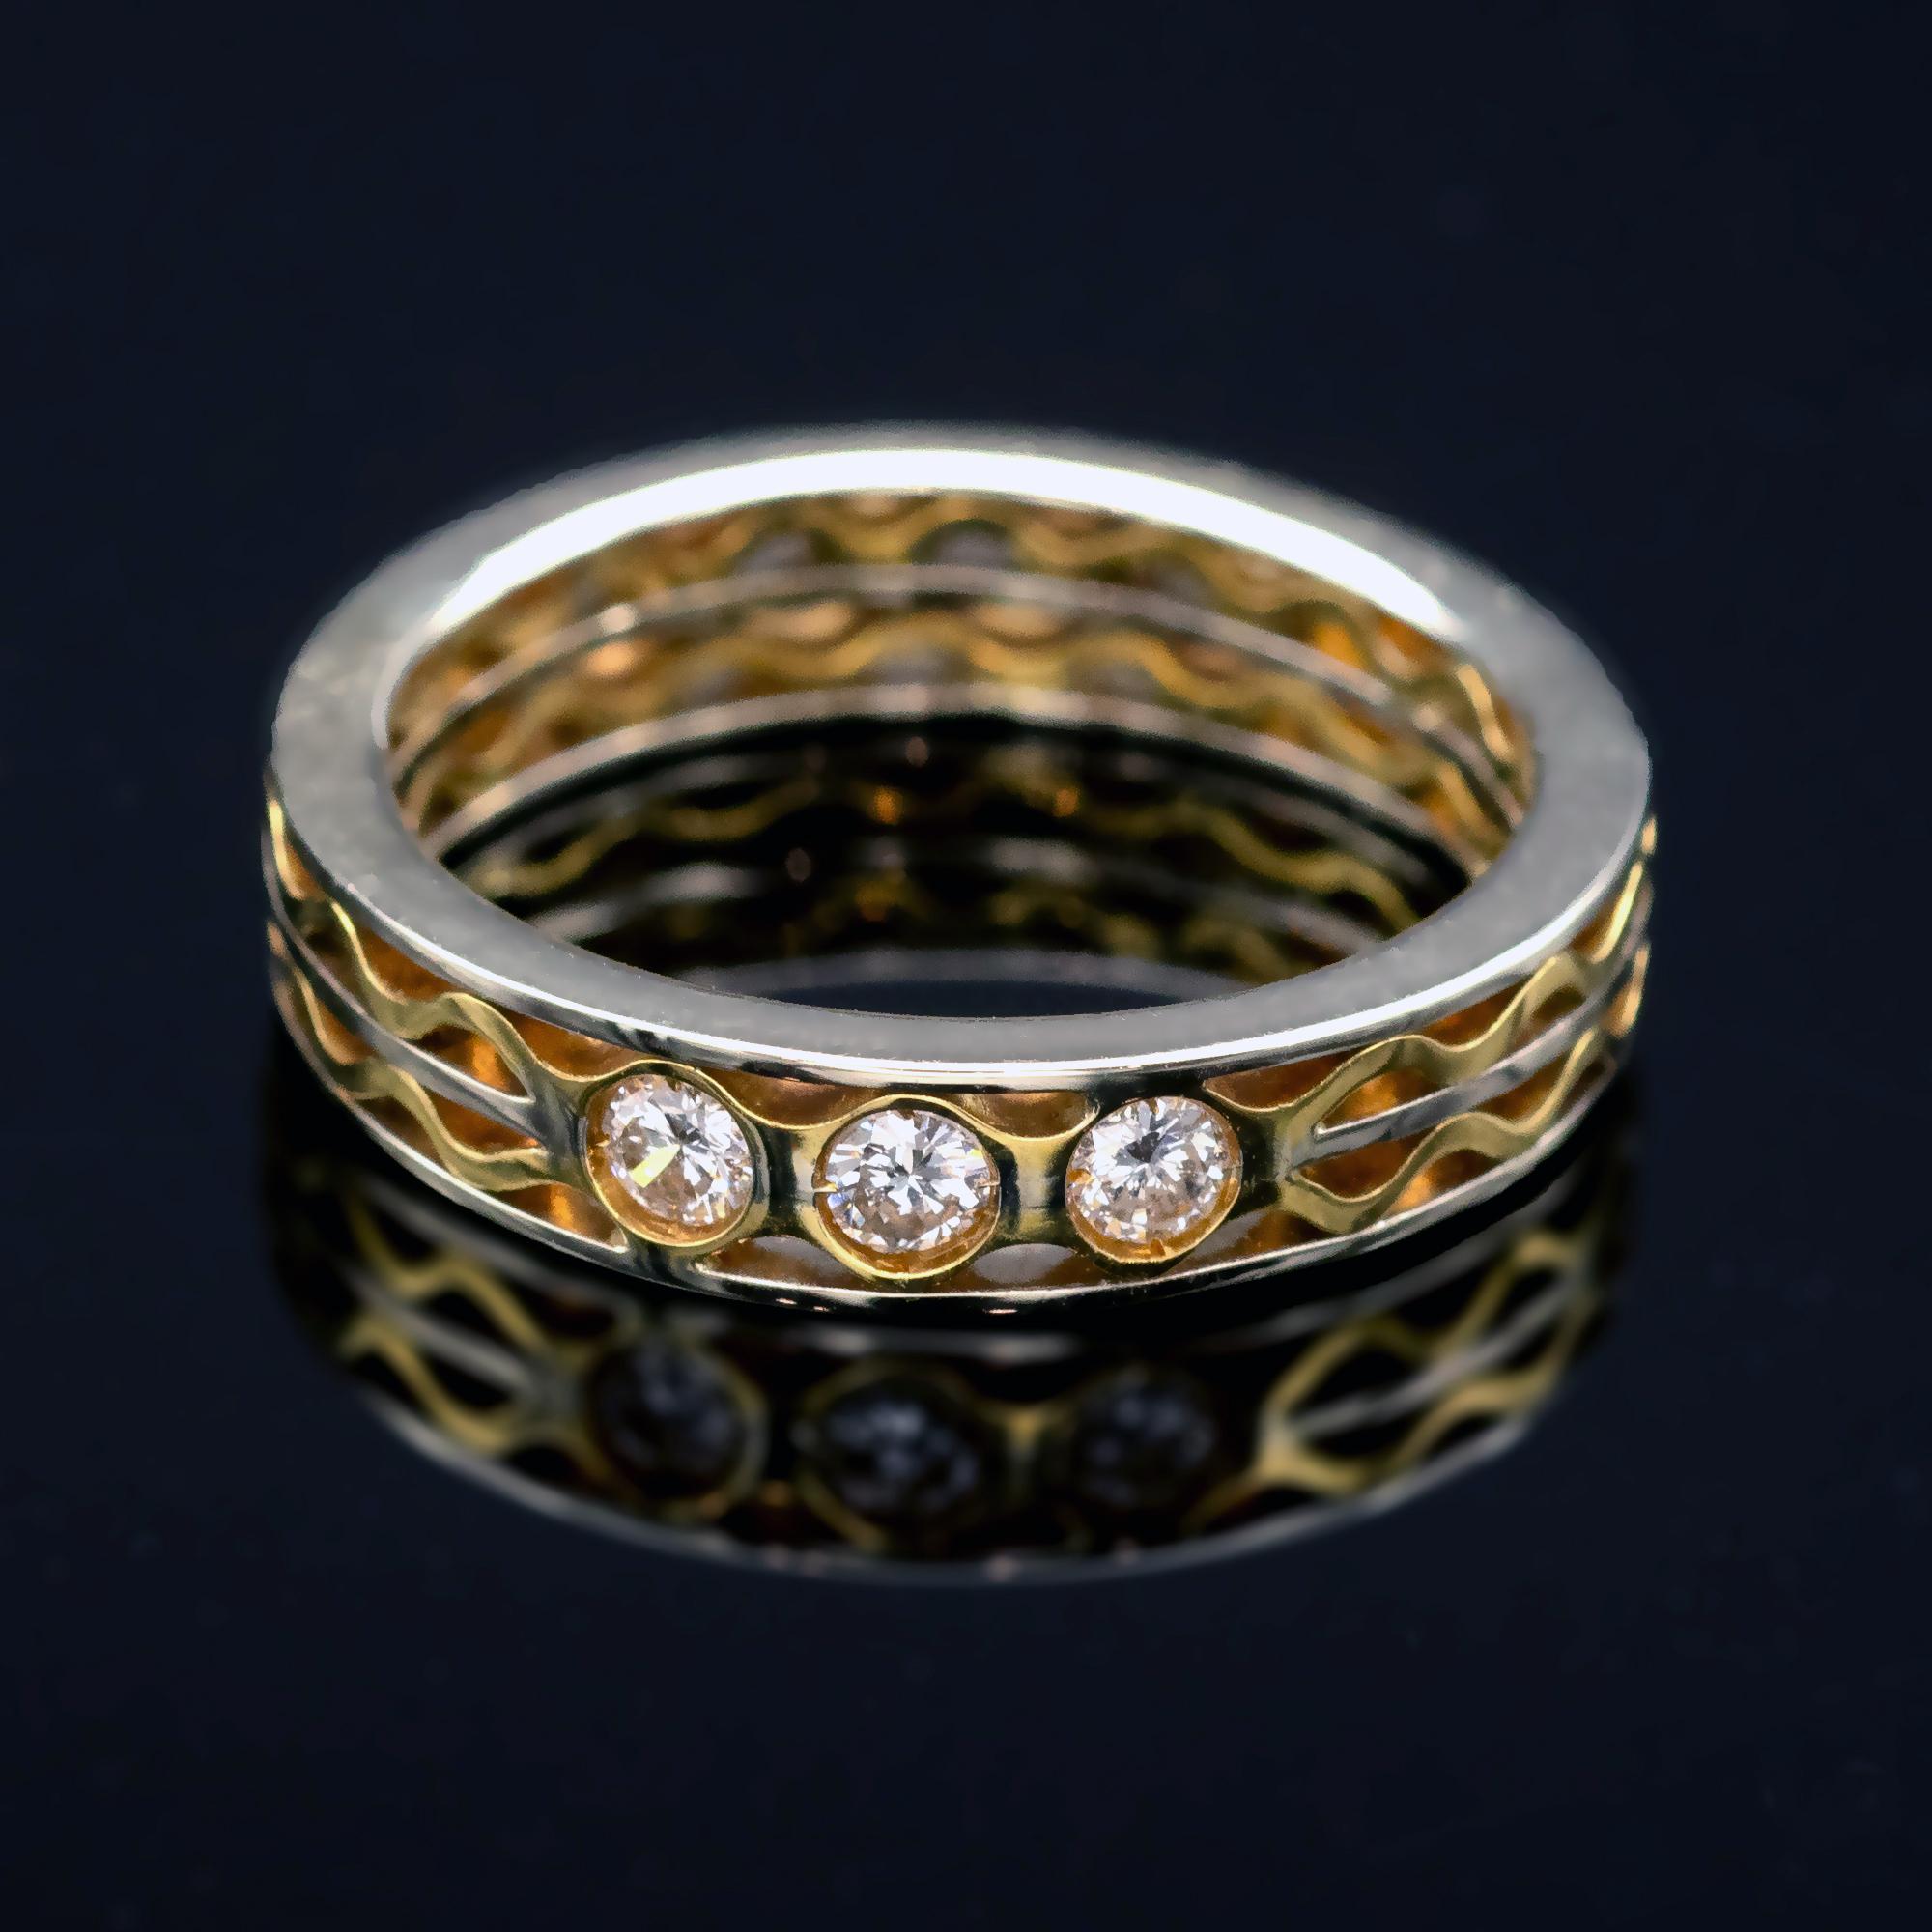 Exquisite hand made contemporary wedding band. Two-tone 18 Karat Gold in a wave pattern showcasing Three diamonds ( Approx. 0.20 carat- F/G VS ). Excellent make, modern design ; the result is striking.

Details: 
Ring Size: 53,5 EU - 6¾